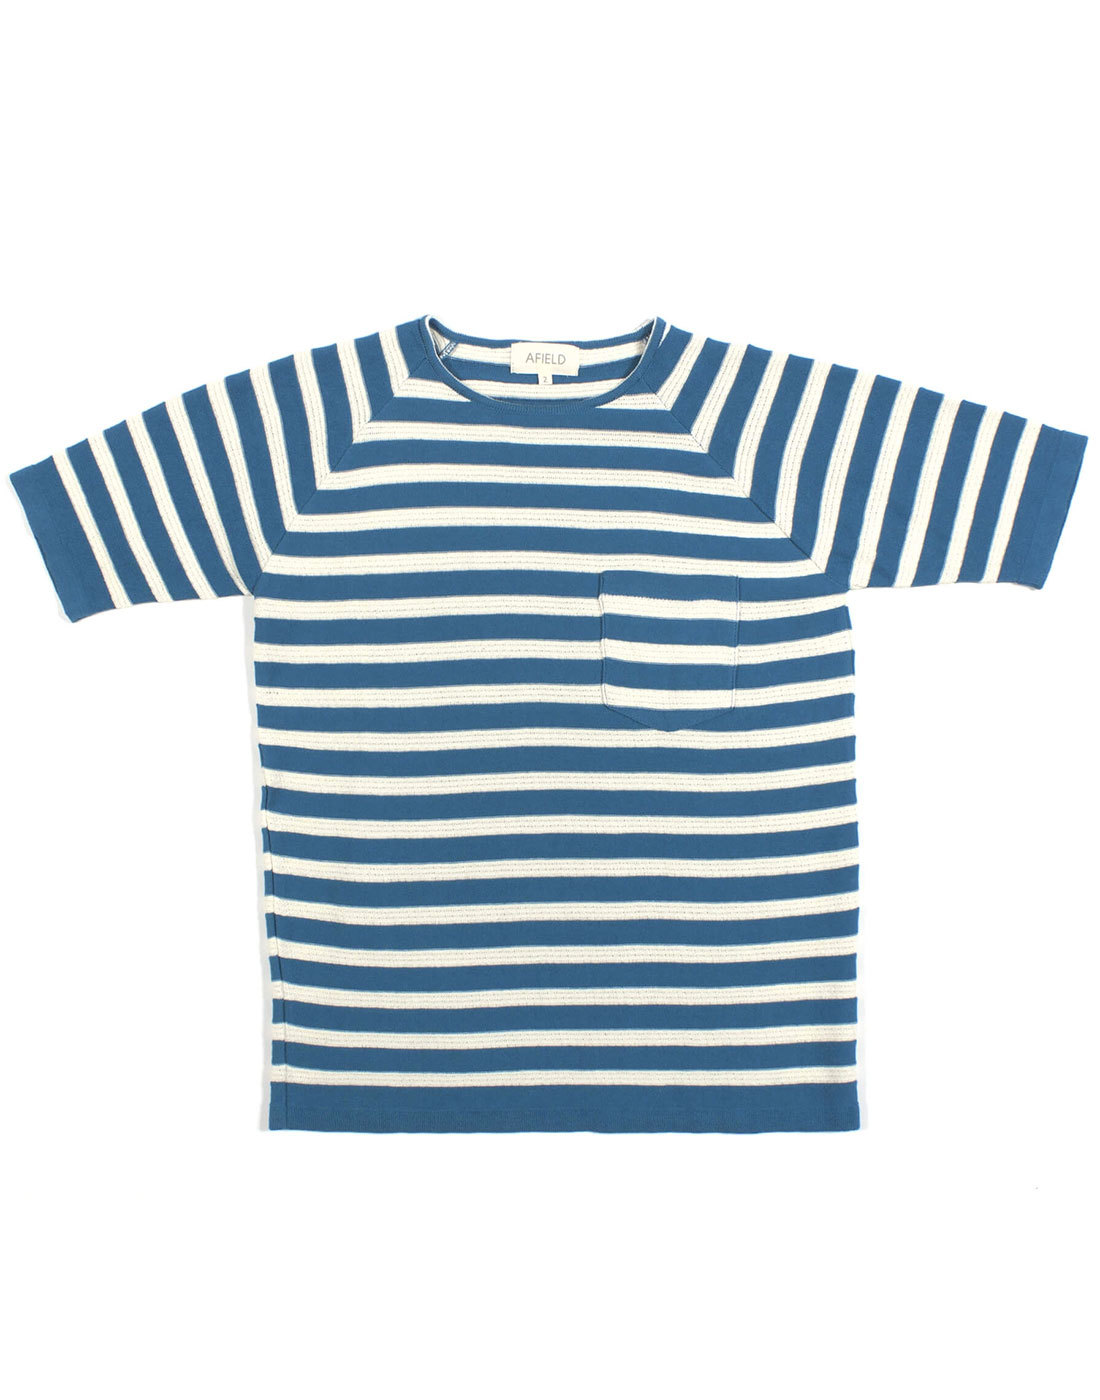 AFIELD Men's Retro Mod Striped Knitted T-Shirt in Blue/White